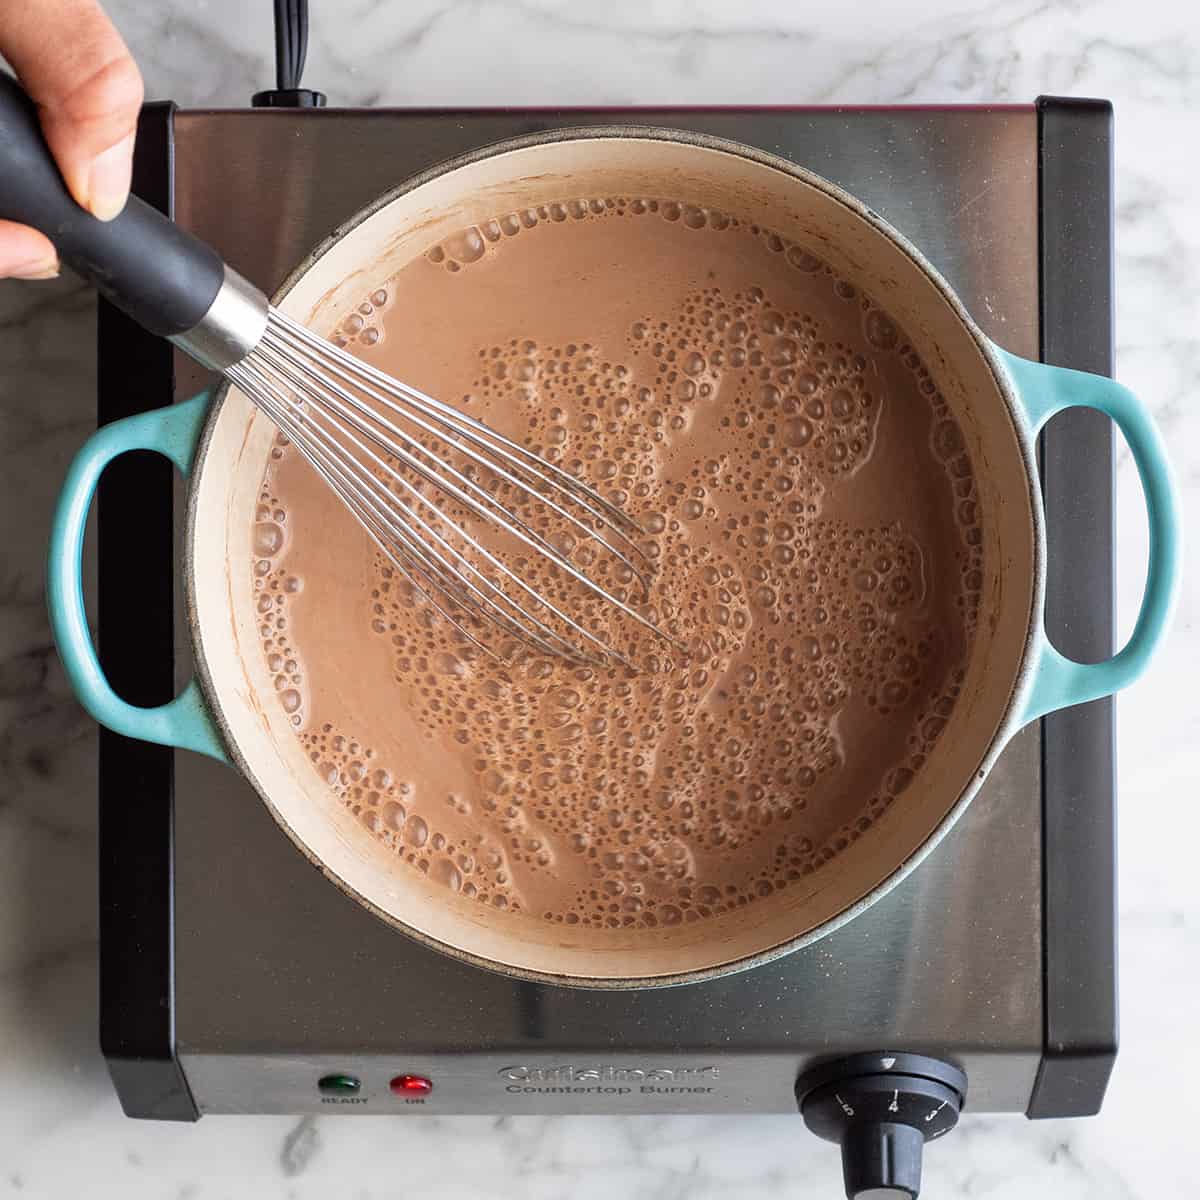 How to Make Hot Chocolate whisking ingredients together in a dutch oven